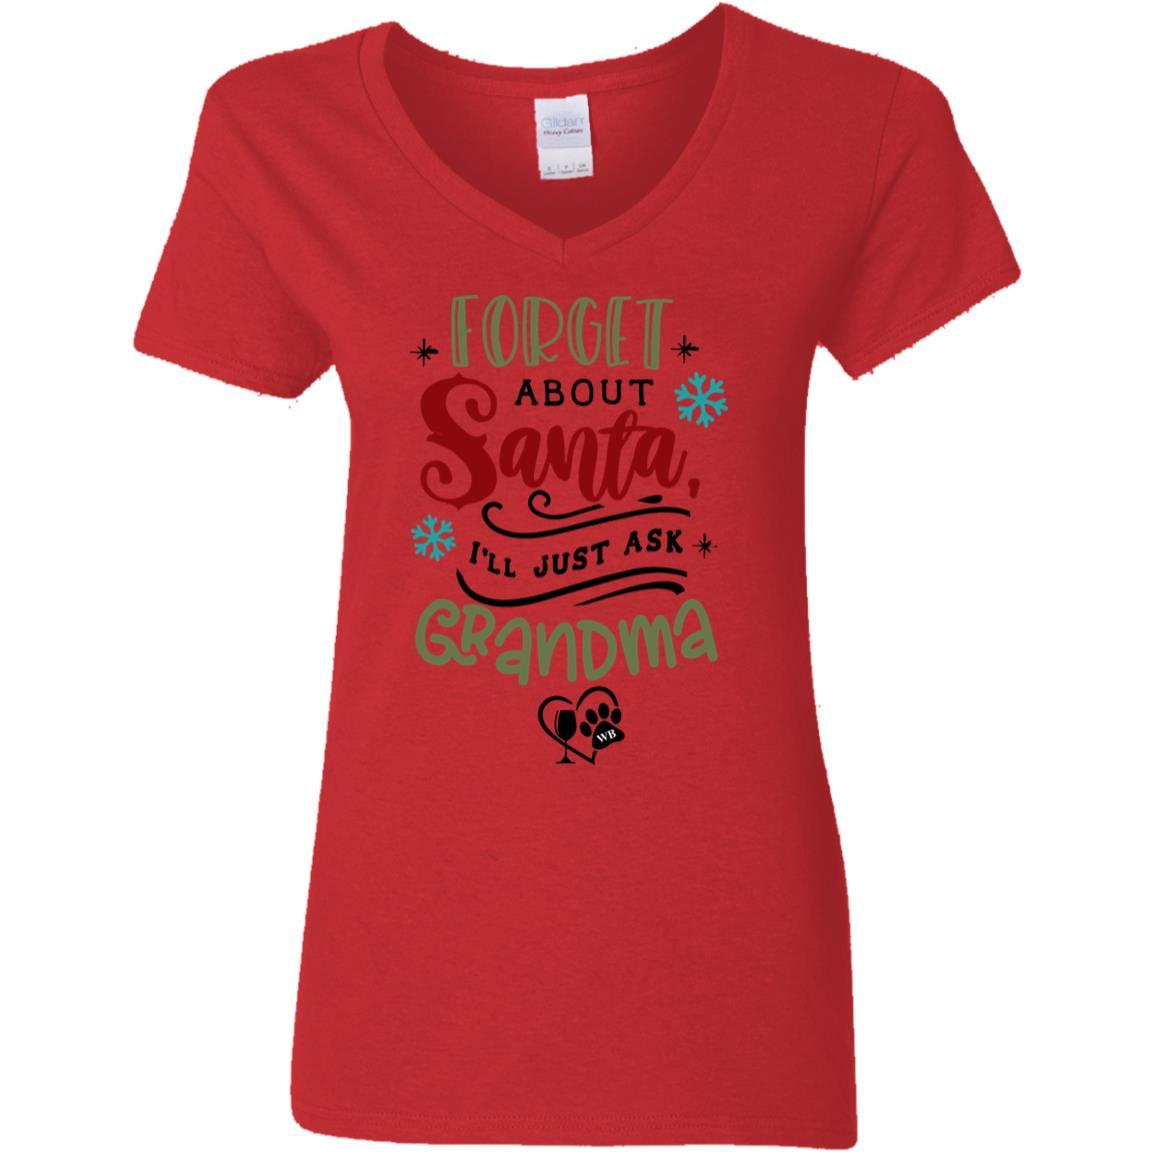 T-Shirts Red / S WineyBitches.Co " Forget About Santa, I'll Just Ask Grandma" Ladies' 5.3 oz. V-Neck T-Shirt WineyBitchesCo